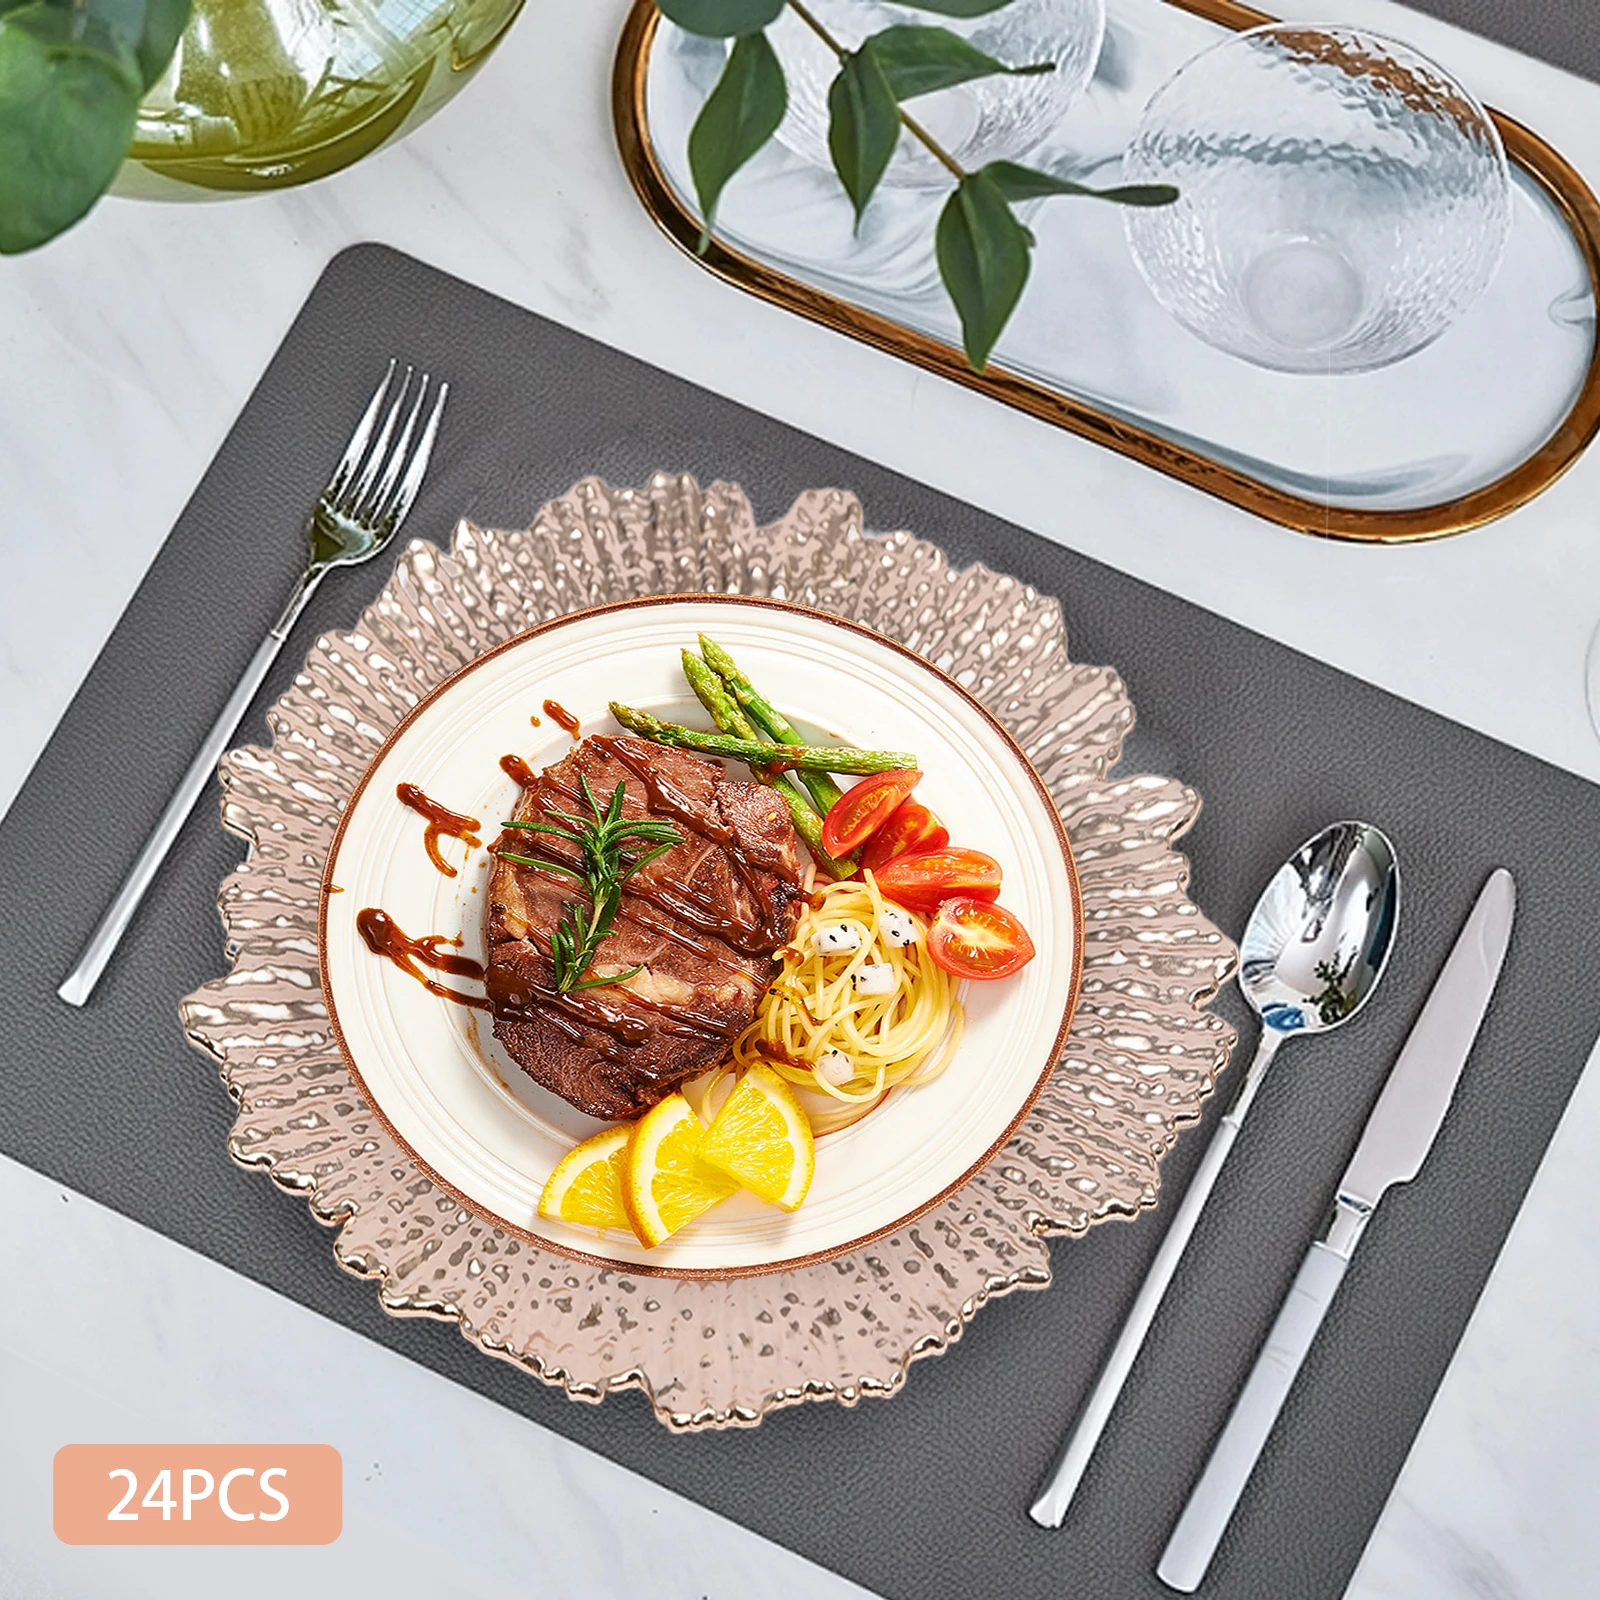 

Rose Gold 12.6 Inch Charger Plates Round Plastic Reef Plate Chargers For Dinner,Wedding,Party Elegant Decoration Place Mats